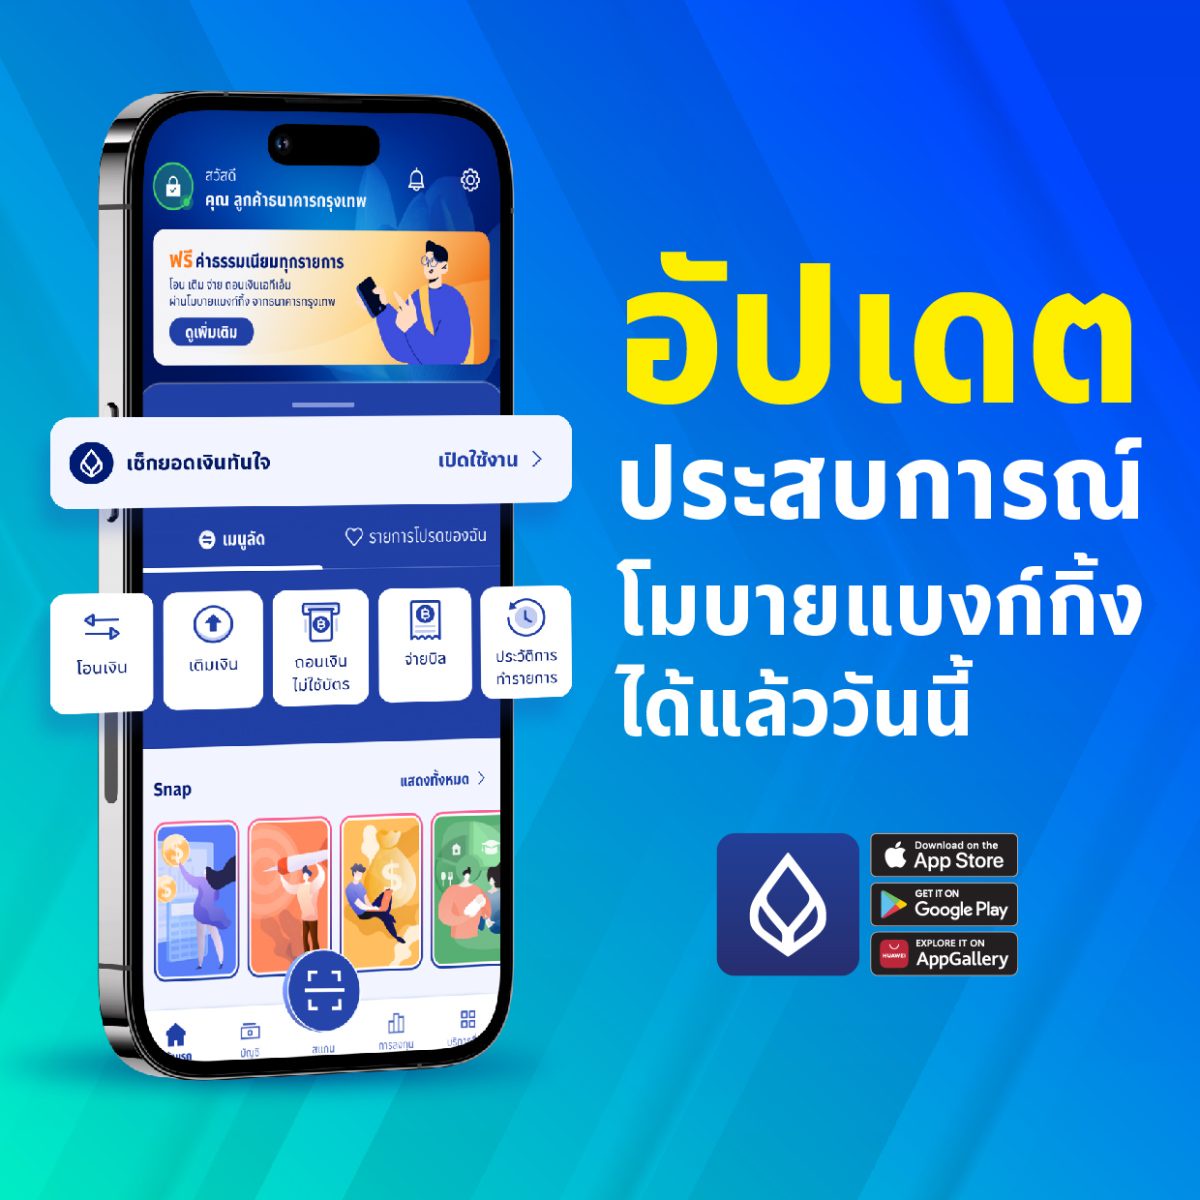 Experience the New Design of Bangkok Bank Mobile Banking together on May 19 Your Finance in Your Hand